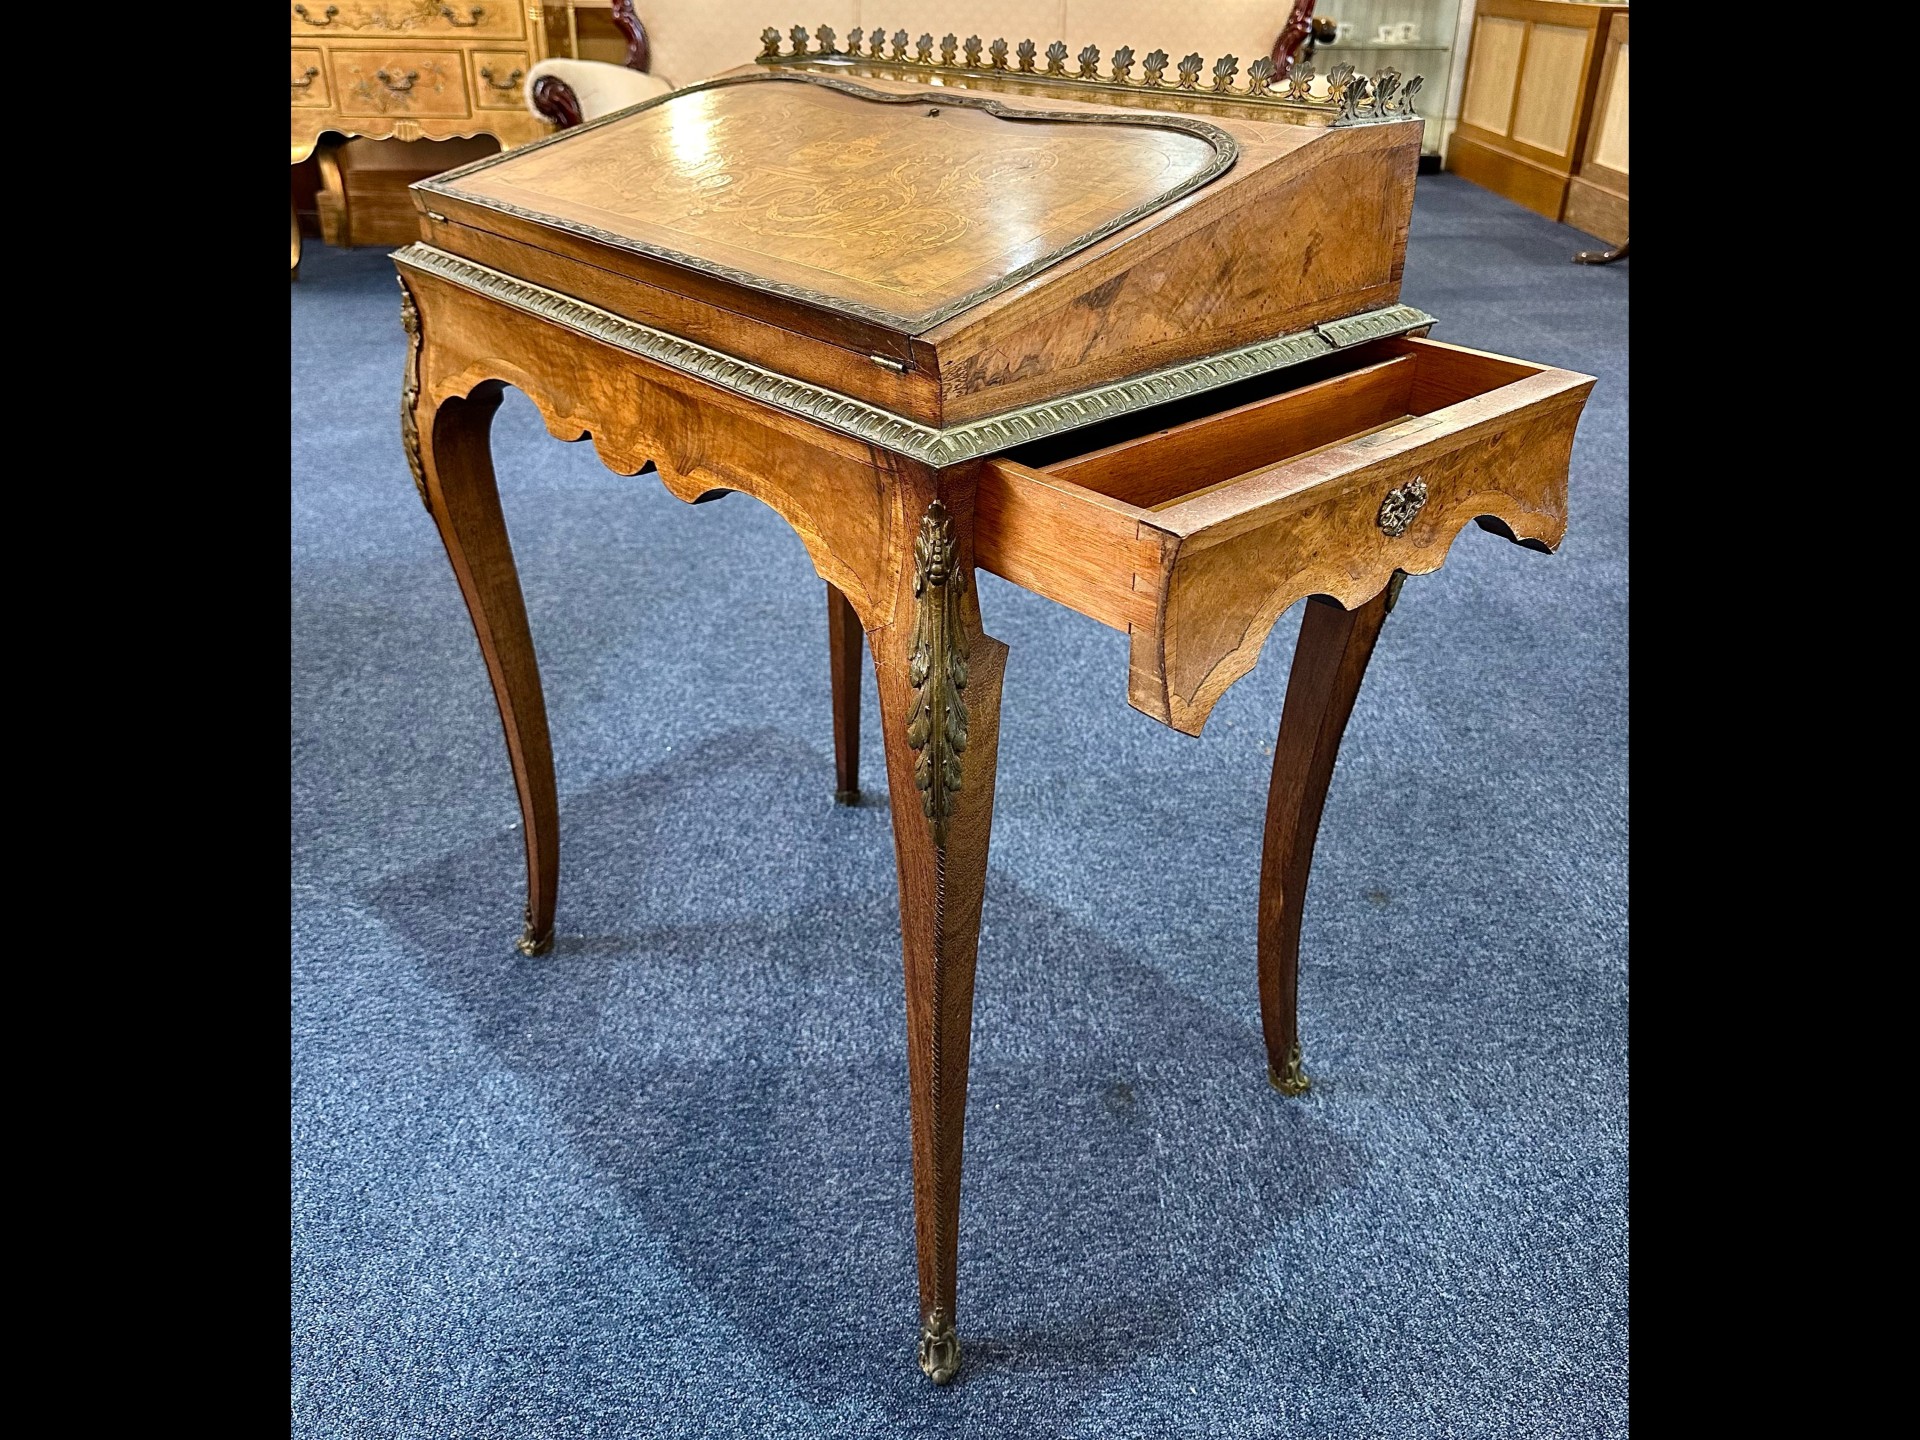 A 19th Century French Ladies Bonheur De Jour Writing Desk of typical form with gilt brass gallery - Image 2 of 7